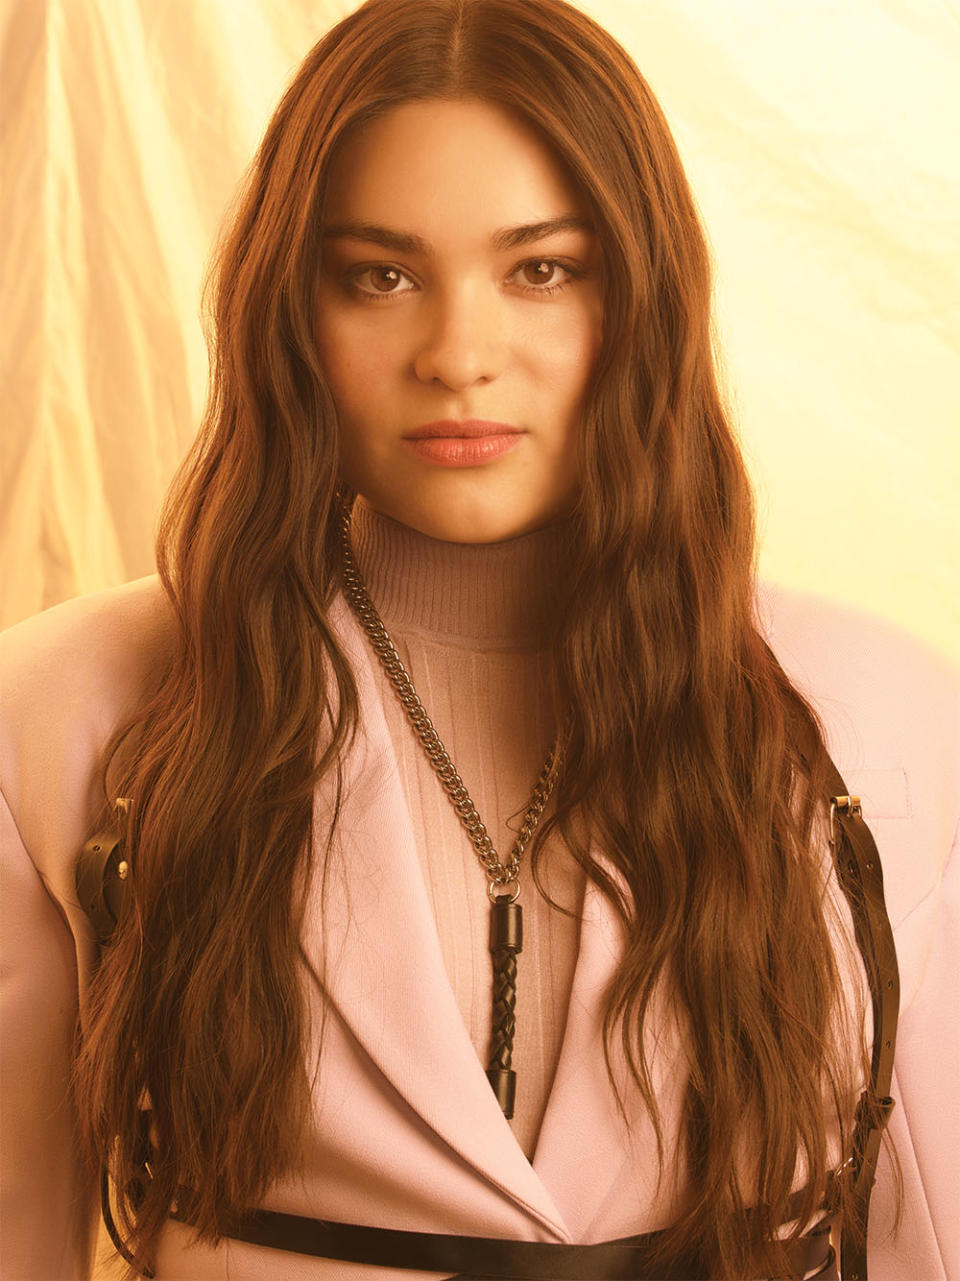 Devery Jacobs was photographed April 29 at PMC Studios in Los Angeles.